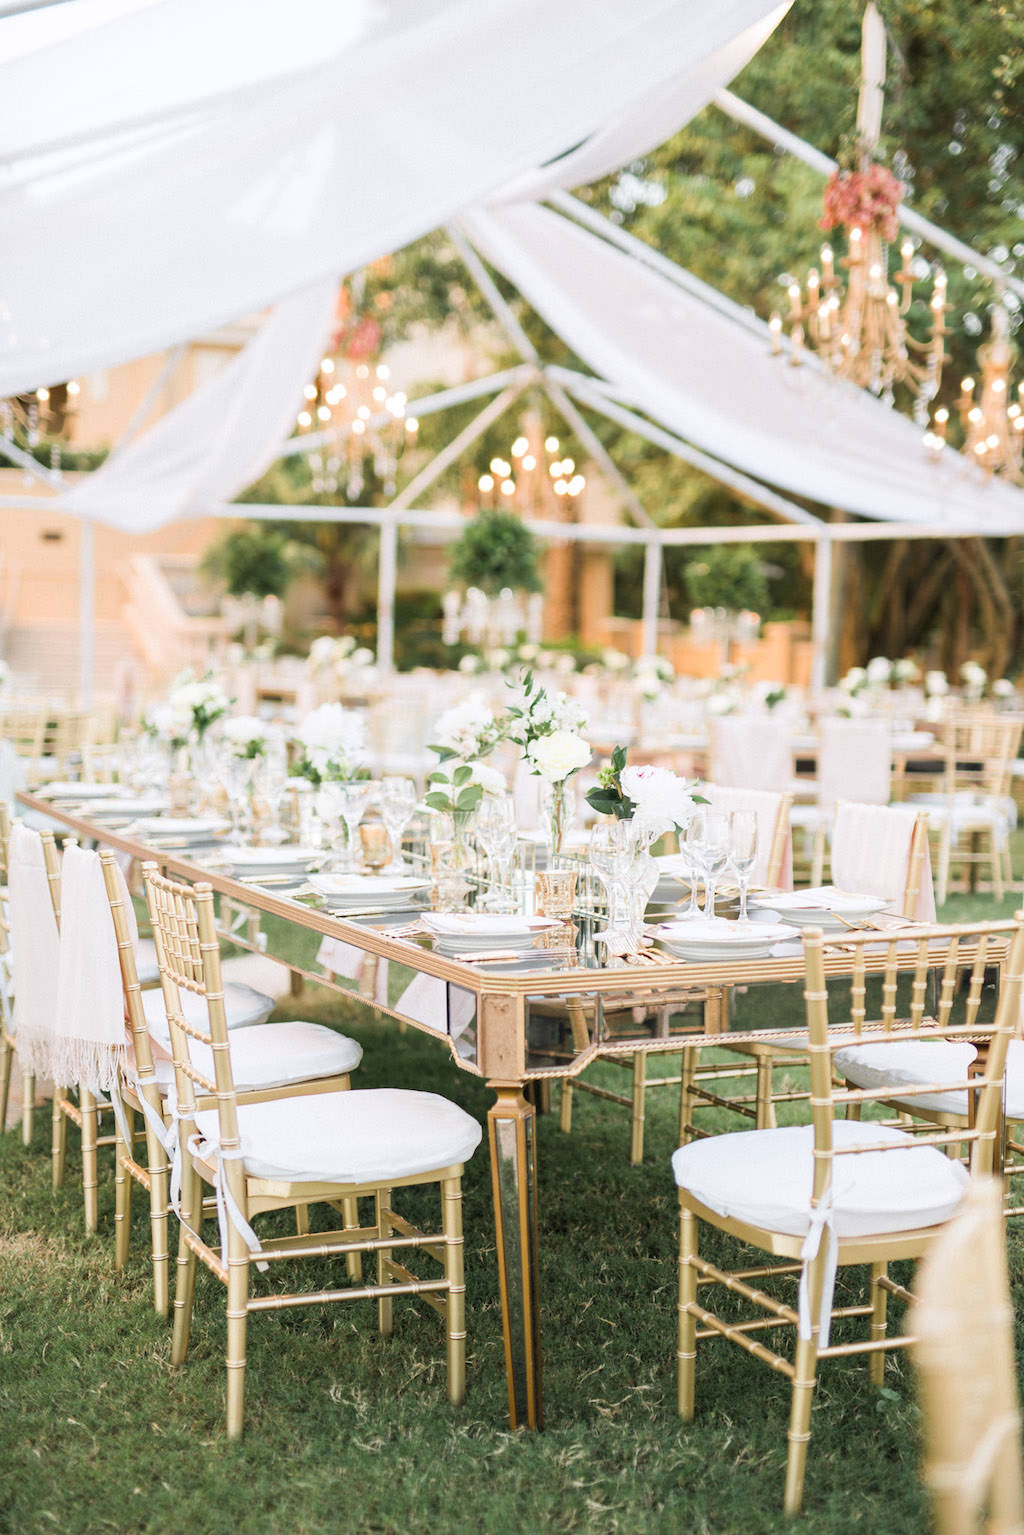 Elegant, Classic, Outdoor Tented Garden Inspired Wedding Decor and Reception, Gold Modern Feasting Tables with Gold Chiavari Chairs, Low White and Green Floral Centerpieces, The Ritz Carlton Sarasota | Tampa Bay Wedding Planner NK Weddings